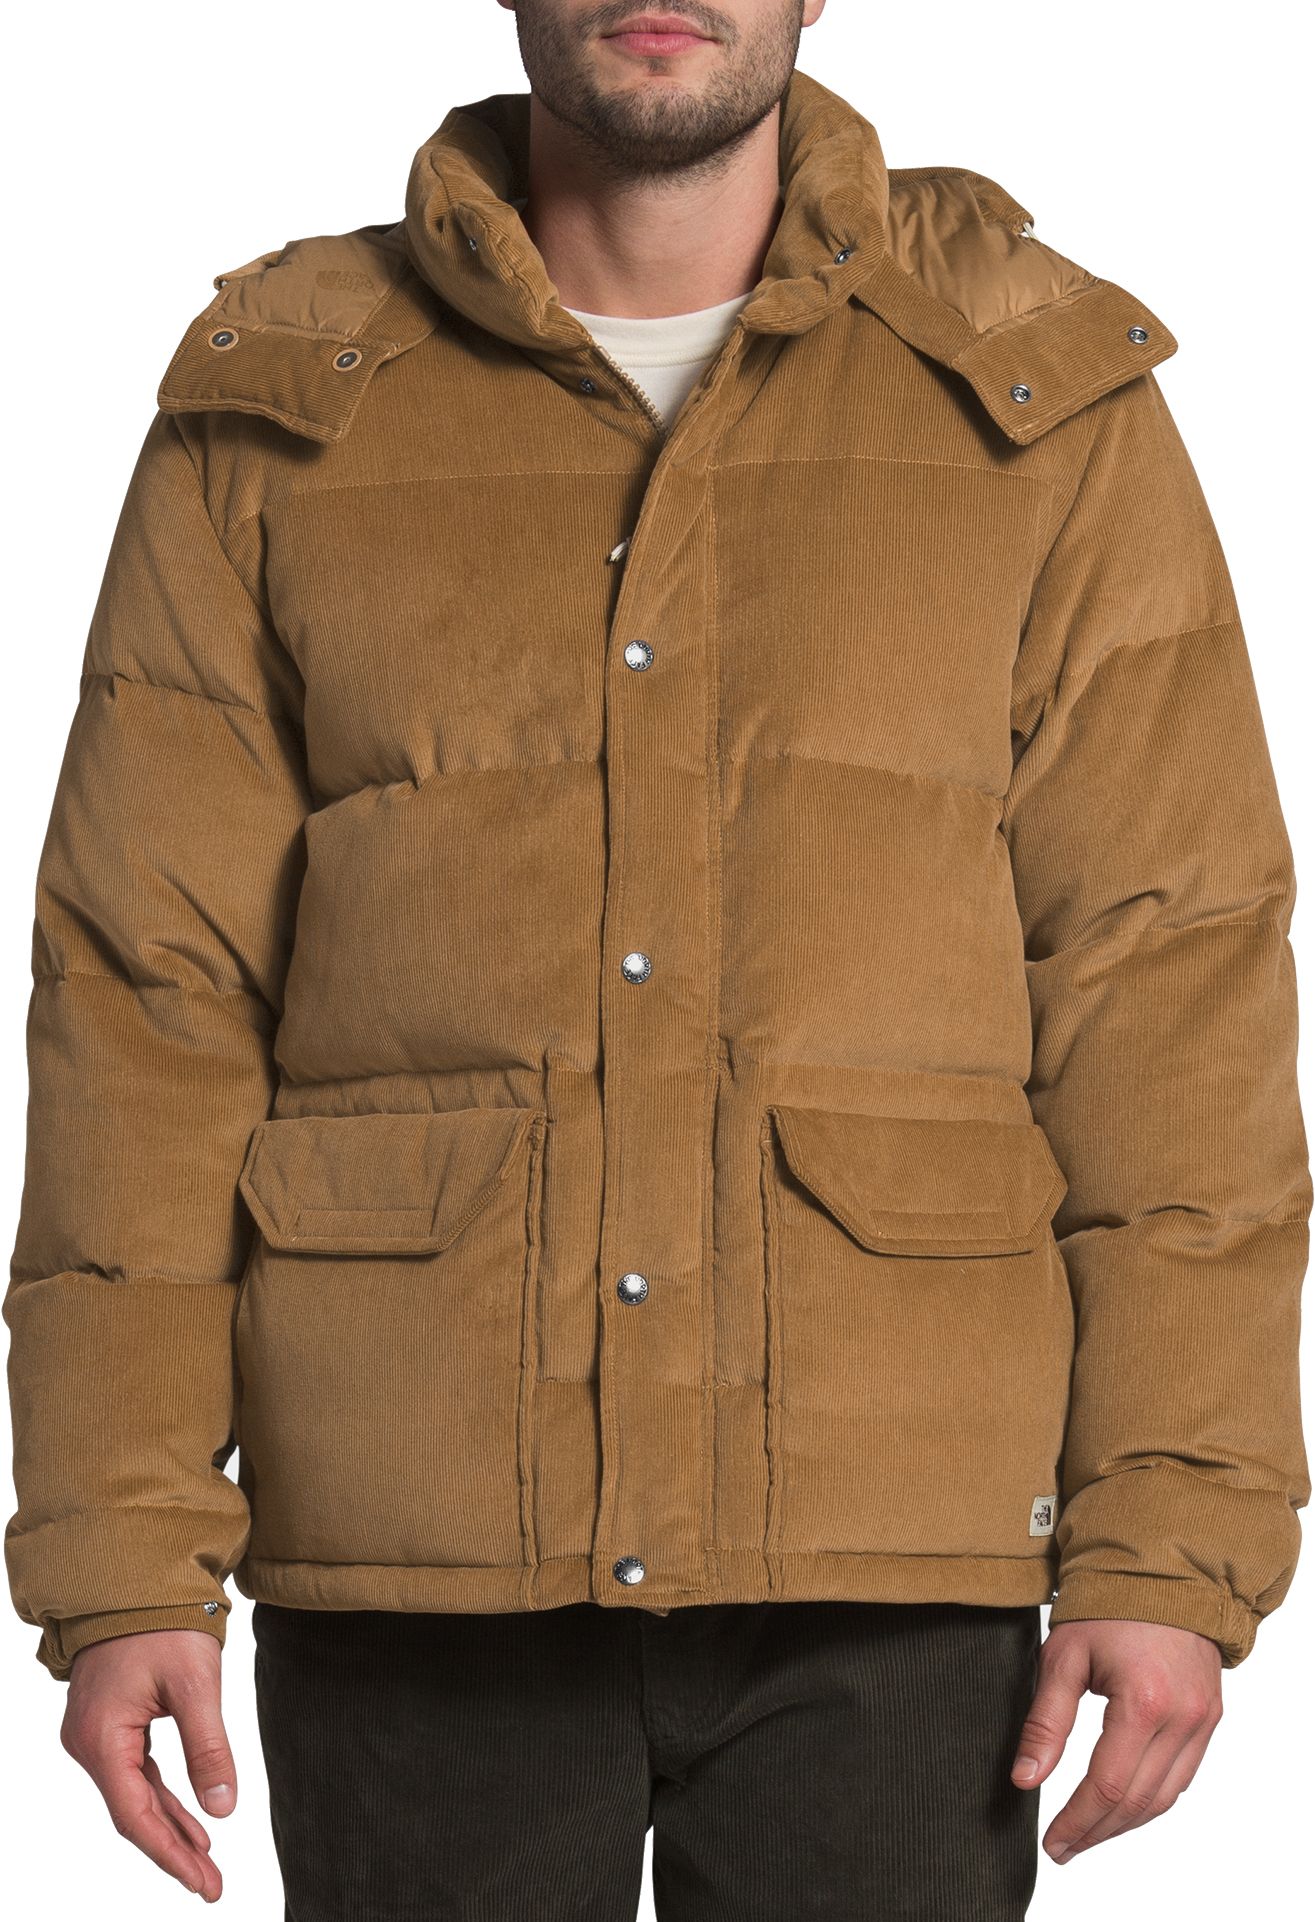 sierra parka the north face